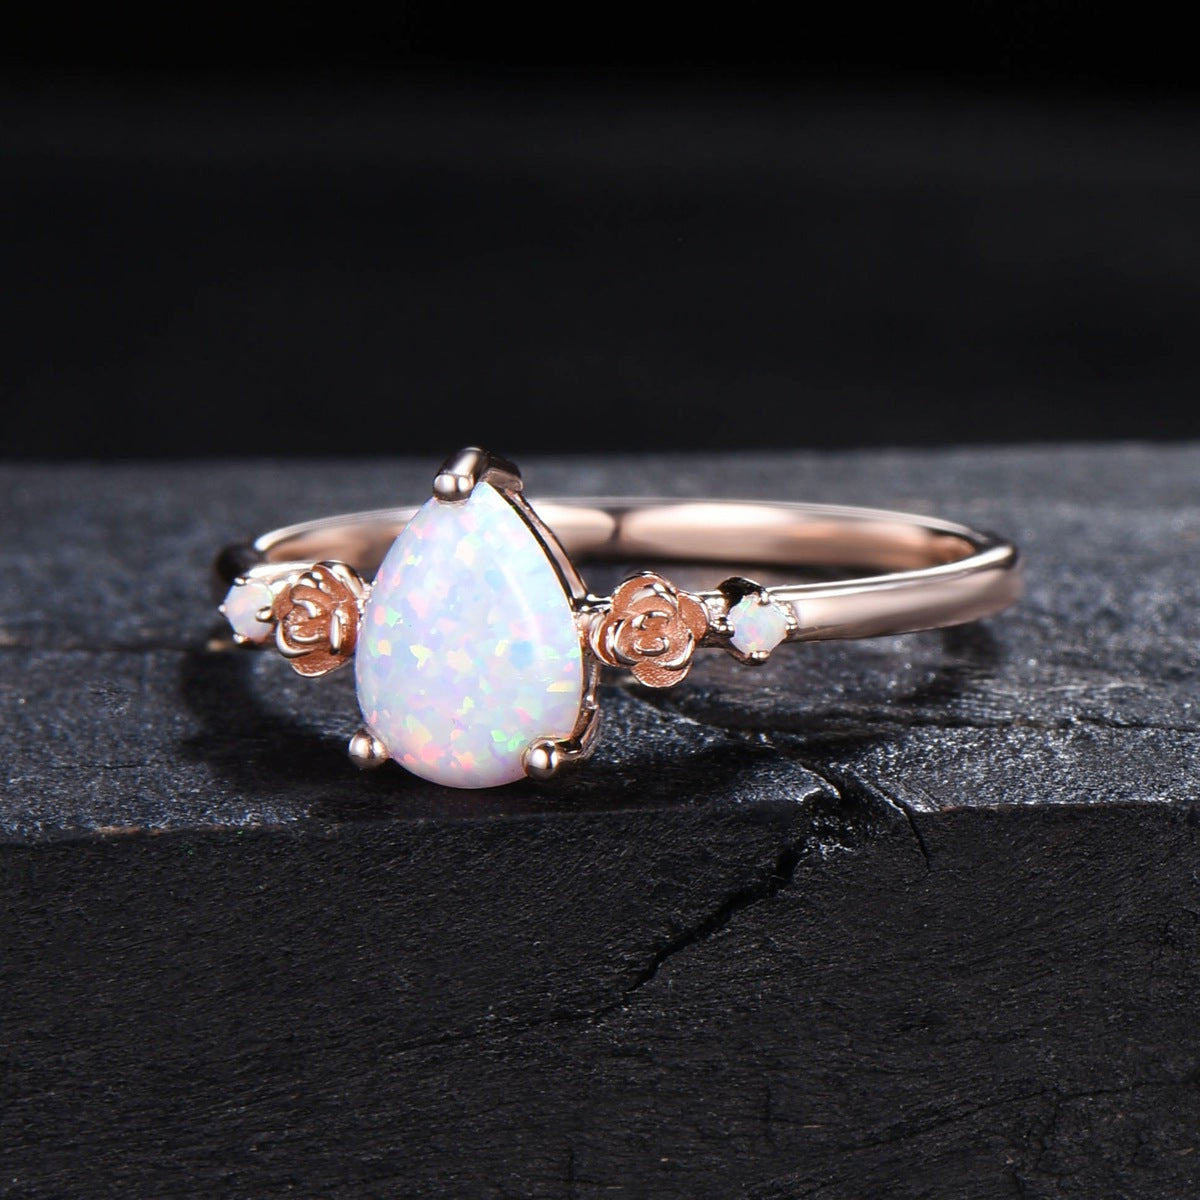 1.25ct Pear Shaped White Opal Engagement Ring Rose Flower Band Floral Opal Ring Nature Inspired Opal Ring October Birthstone Birthday Gift